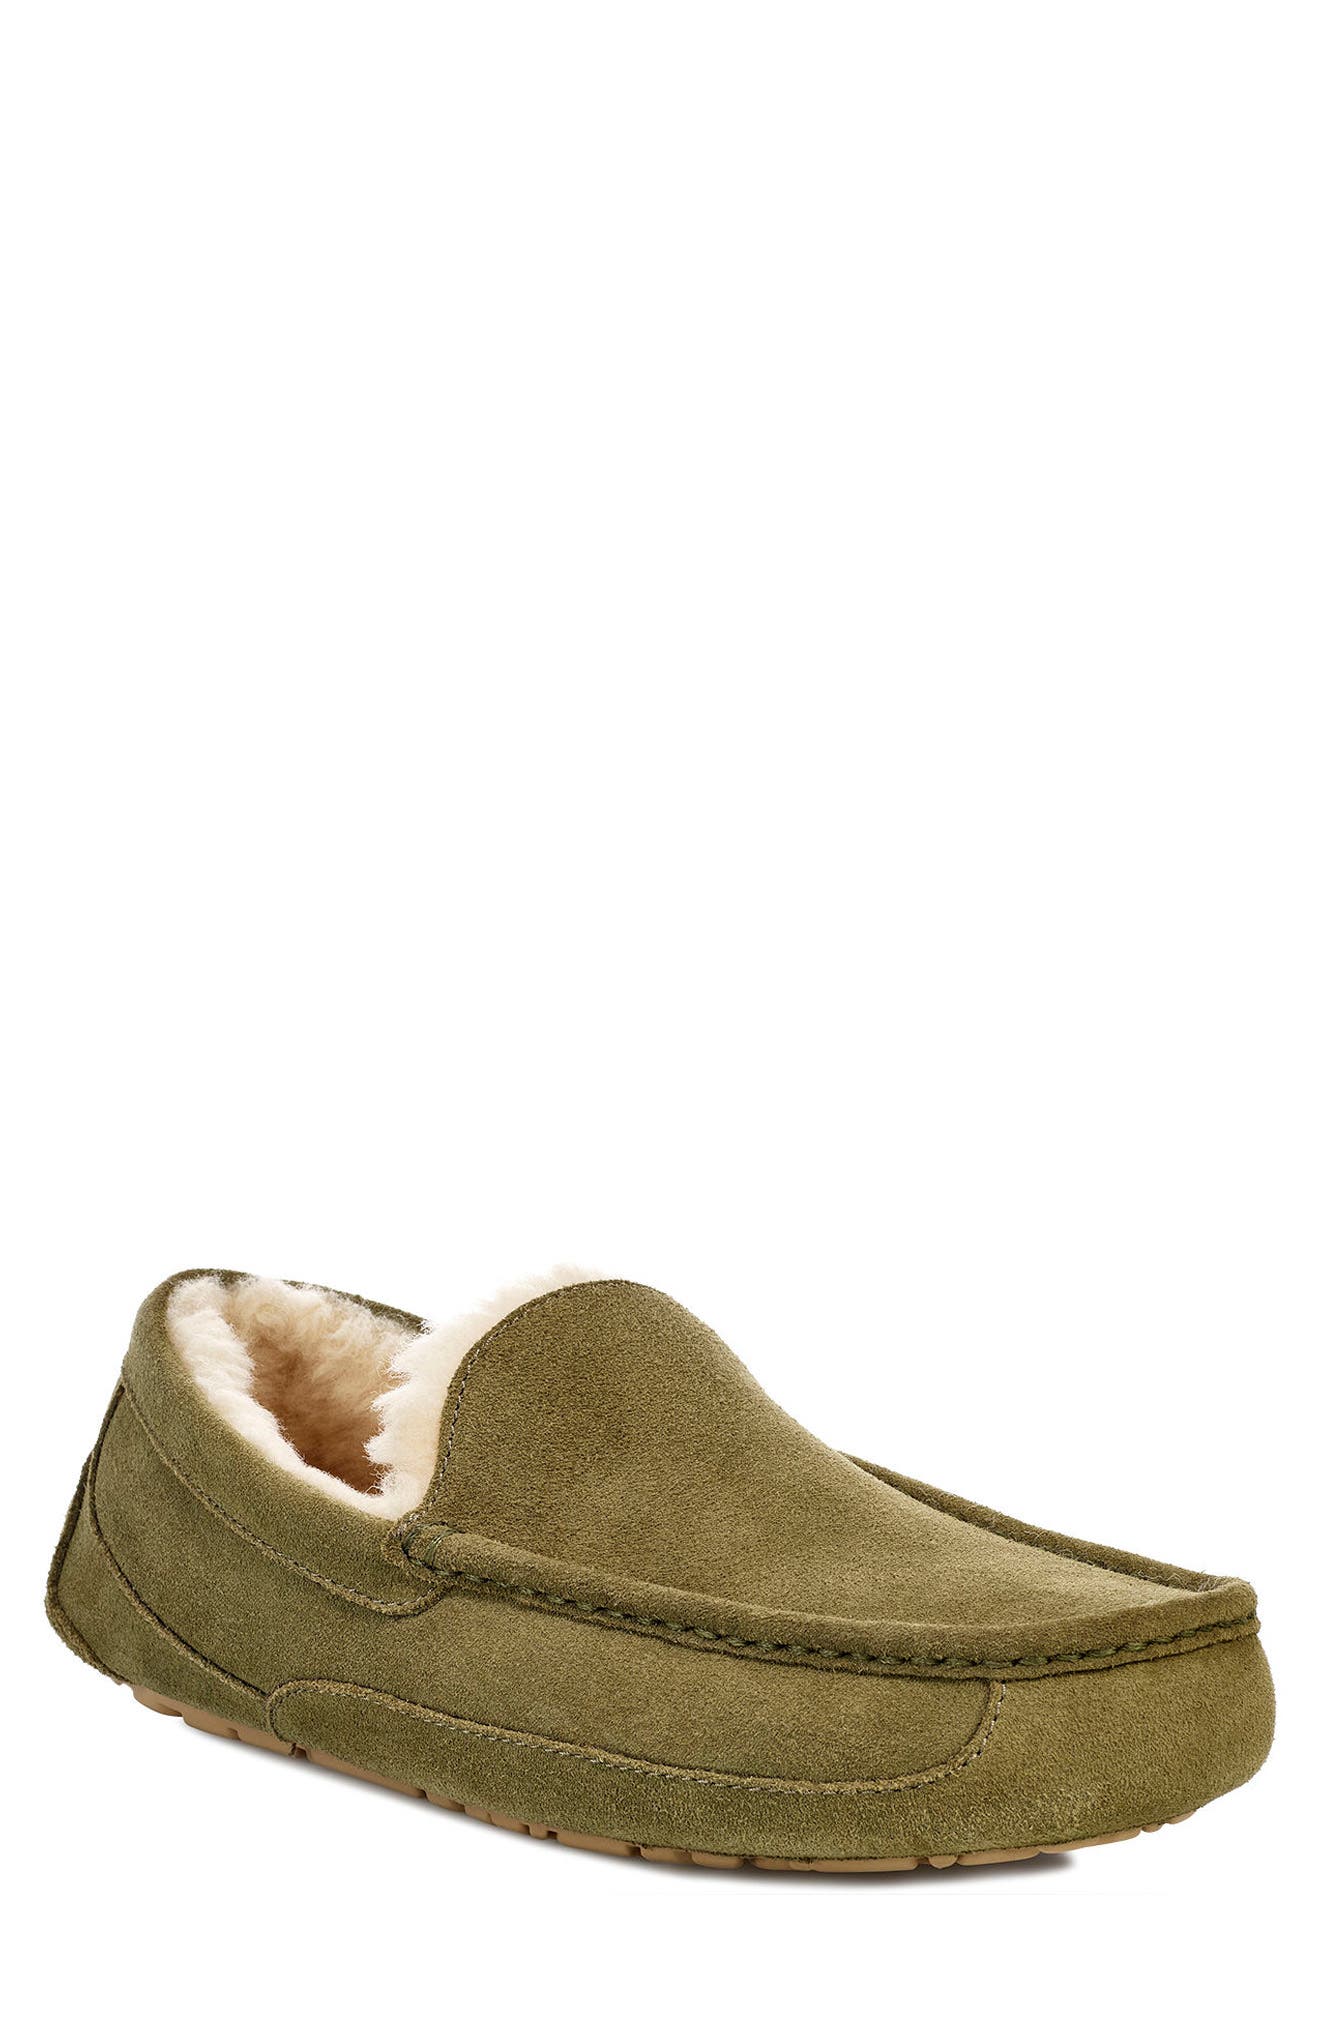 ugg moccasins clearance